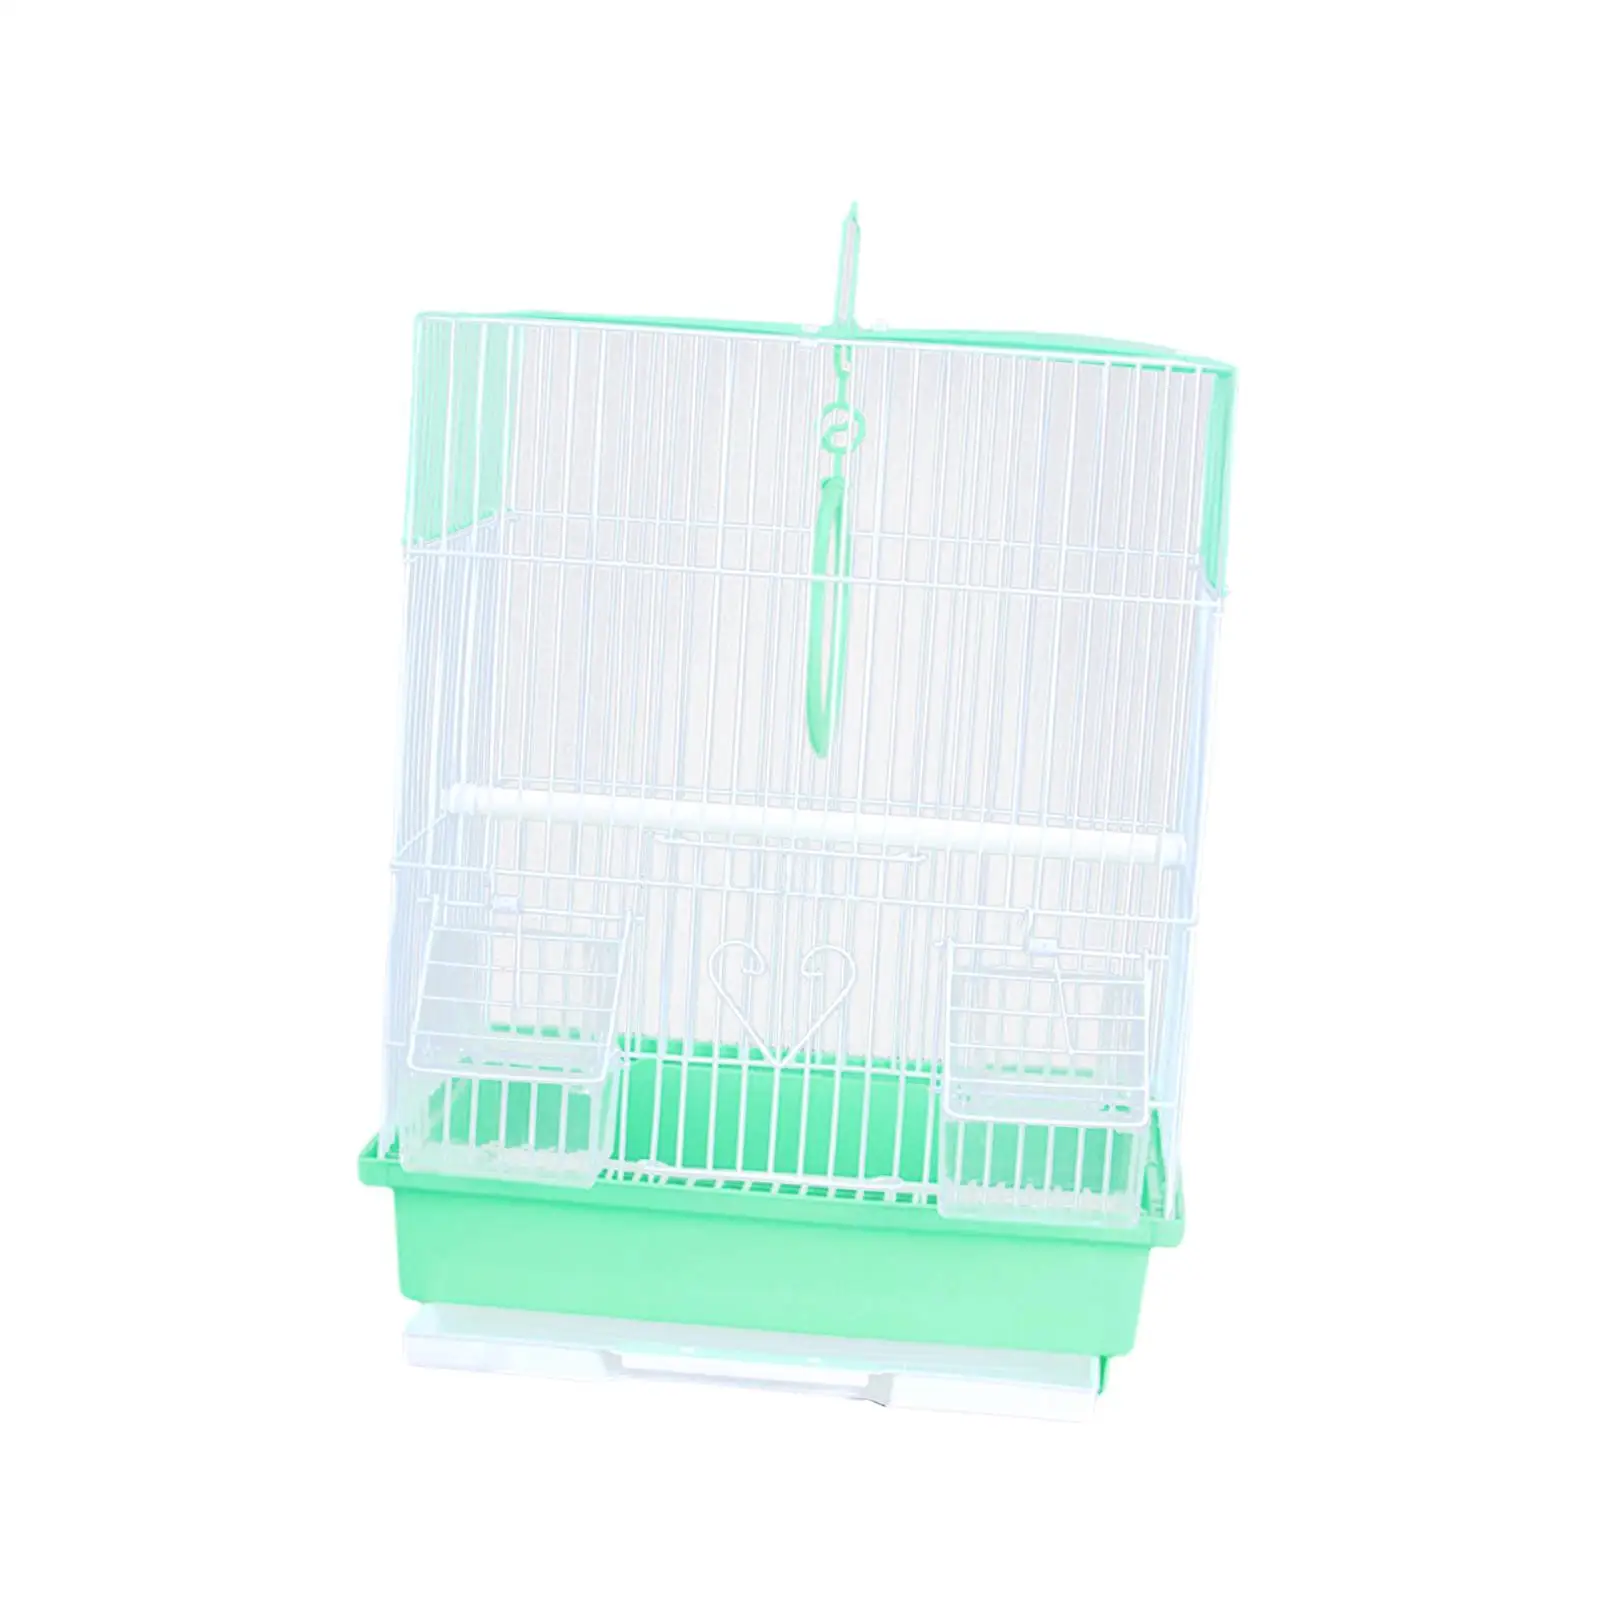 Durable Bird Cage Stand Cage Hanging Hook Pet Supplies Birdcage House Nest for Parrot Conures Finches Cockatiel Parakeet